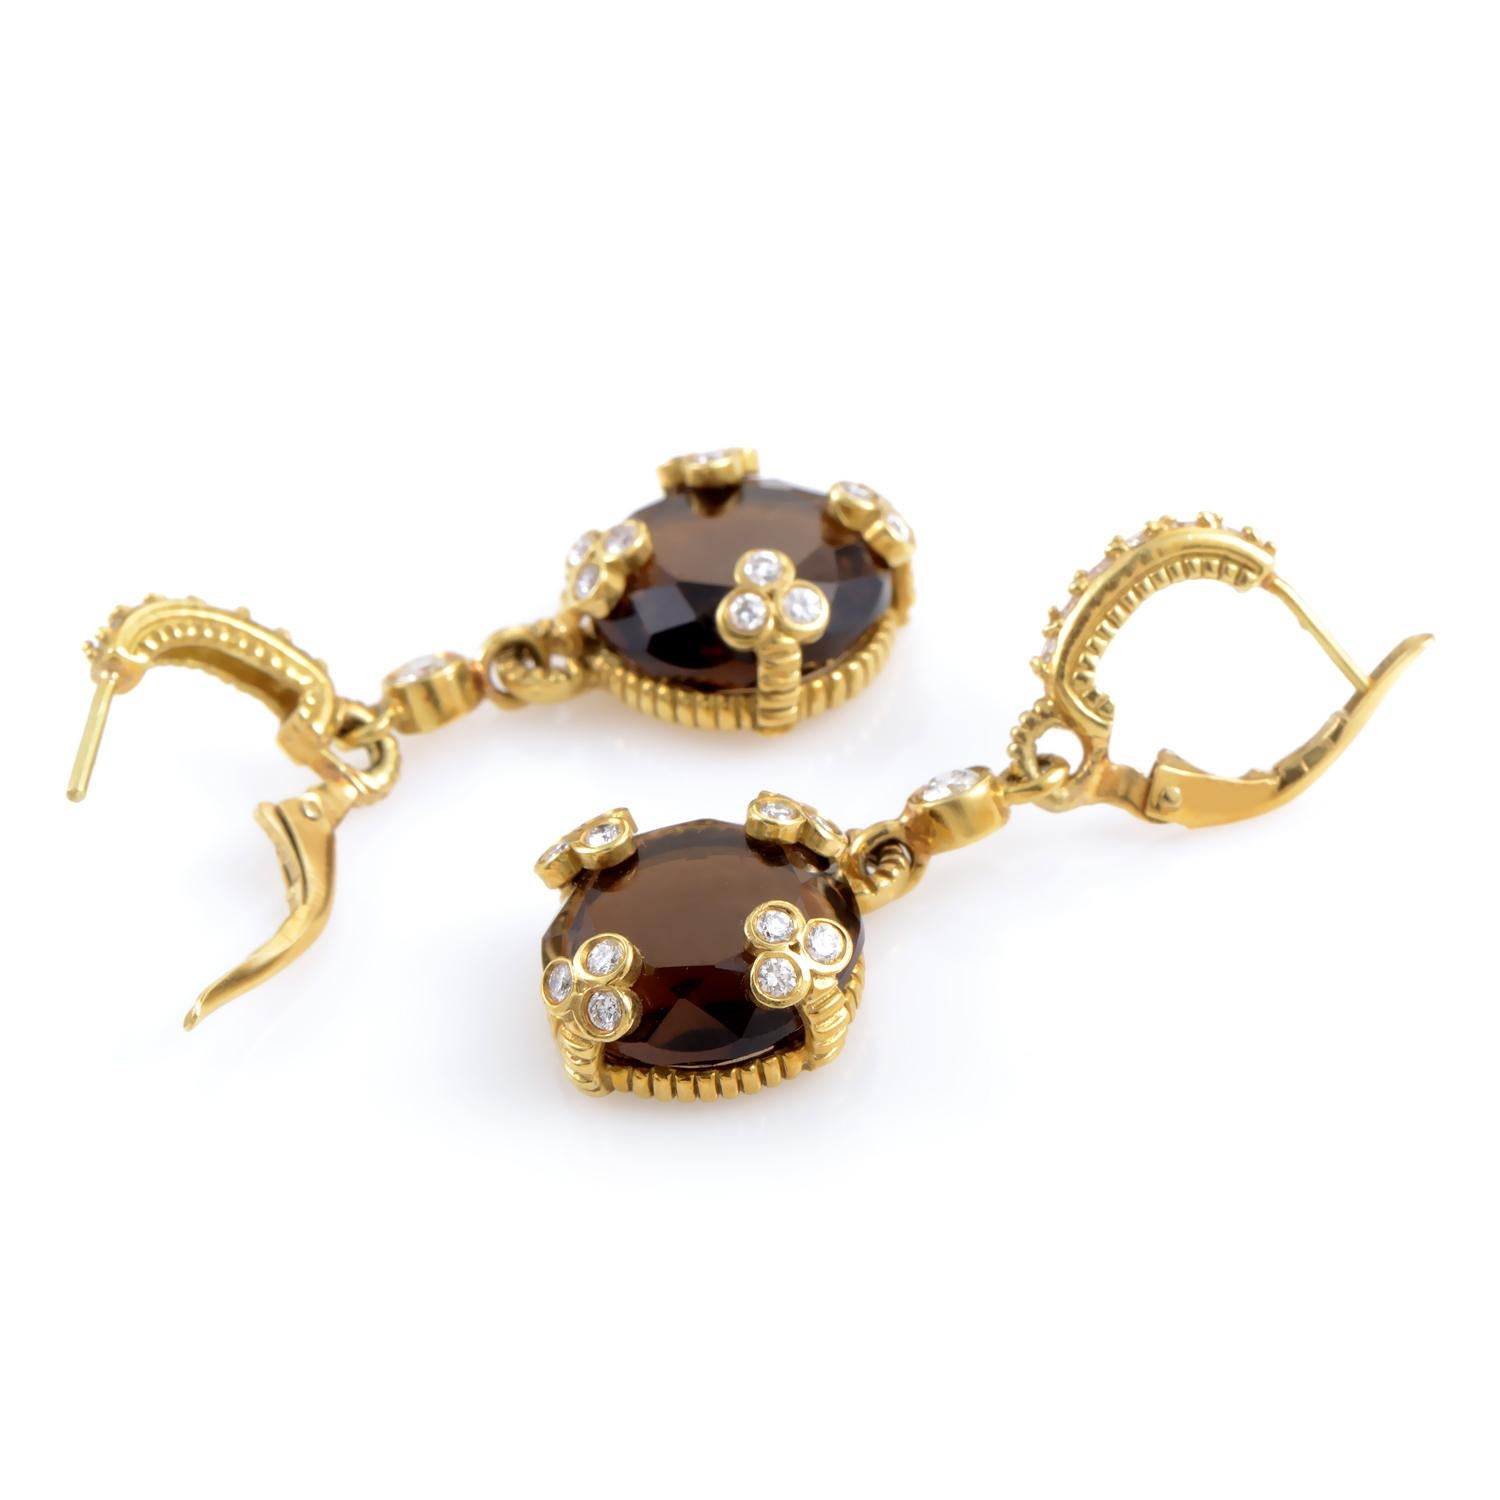 Delicately detailed and daring, these Judith Ripka Earrings are perfect for the woman who knows what she wants and how to get it. The 18K gold gives a warmth and glow to the smokey quartz at the end of these pendant earrings. Held into place by